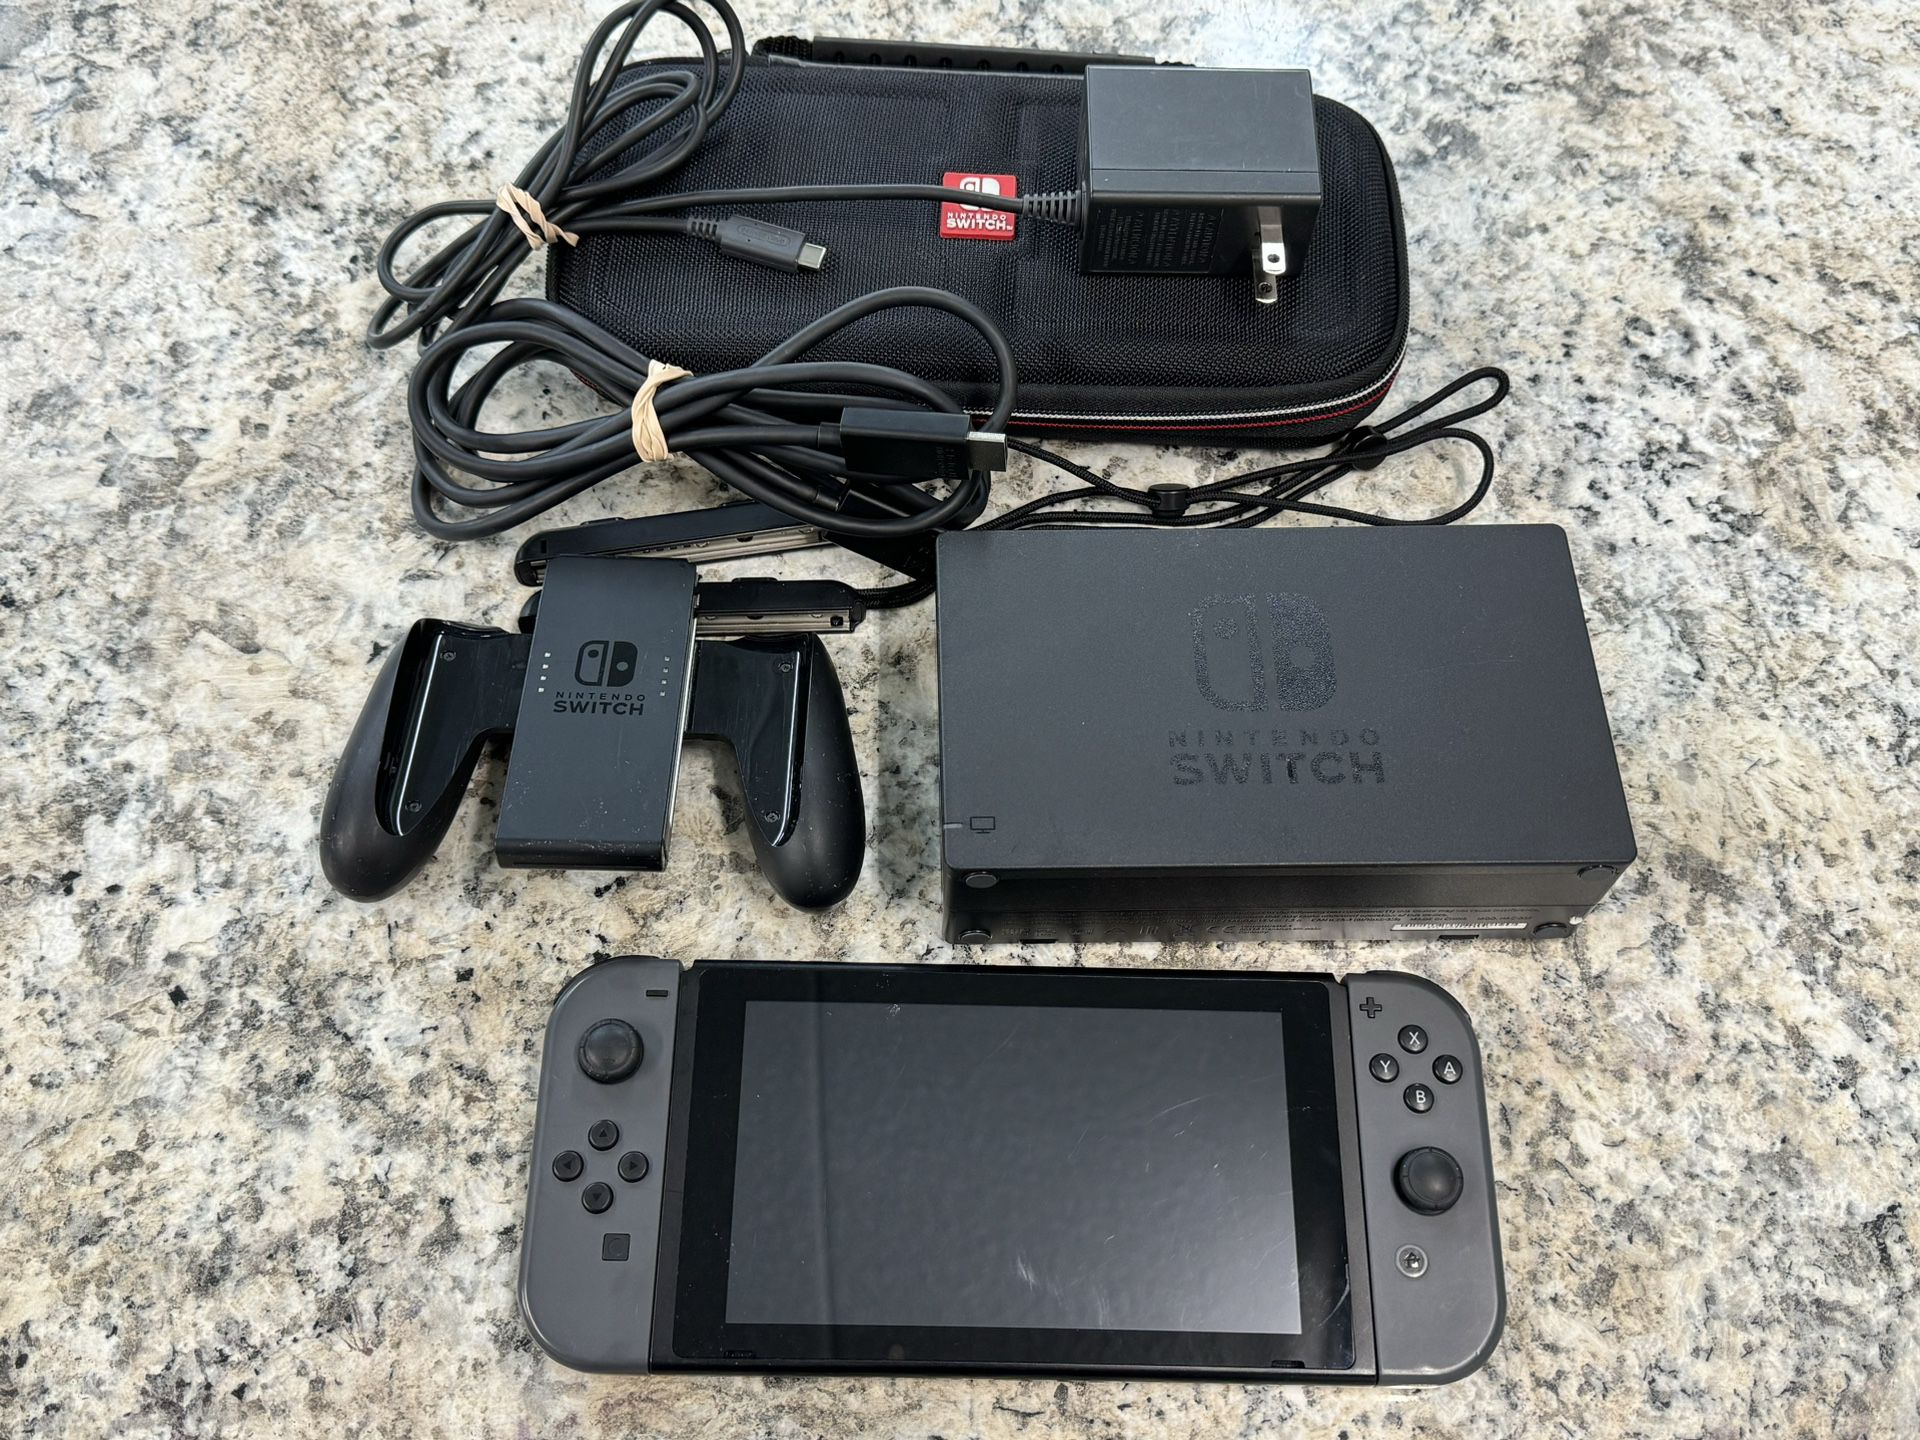 Nintendo Switch UNPATCHED V1 HAC-001 32B Console 